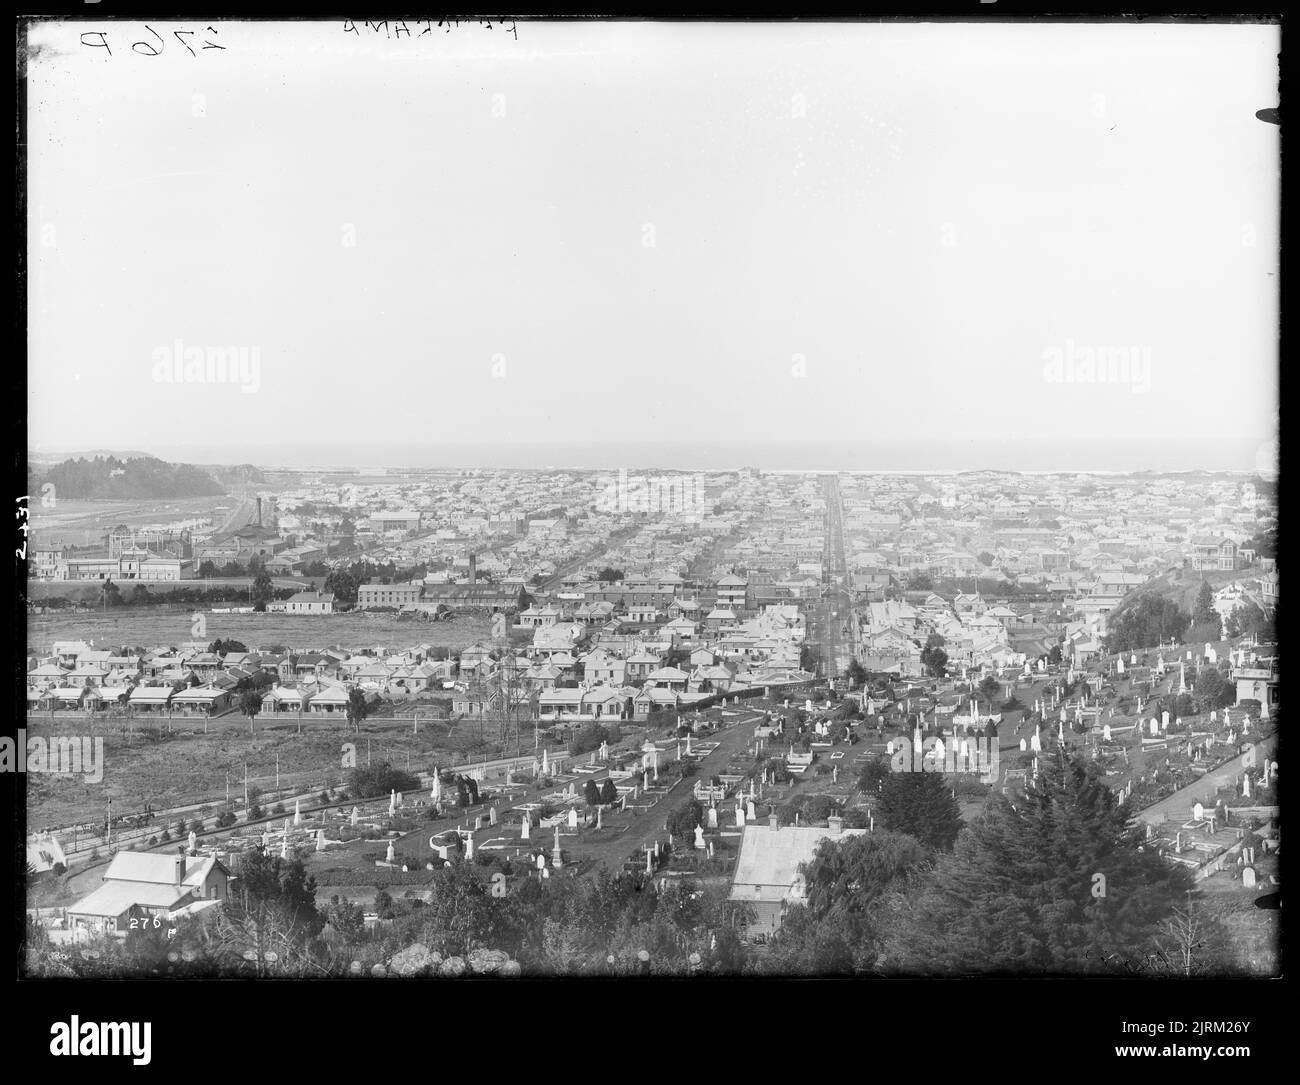 Dunedin from South Cemetery, Dunedin, by Muir & Moodie. Stock Photo